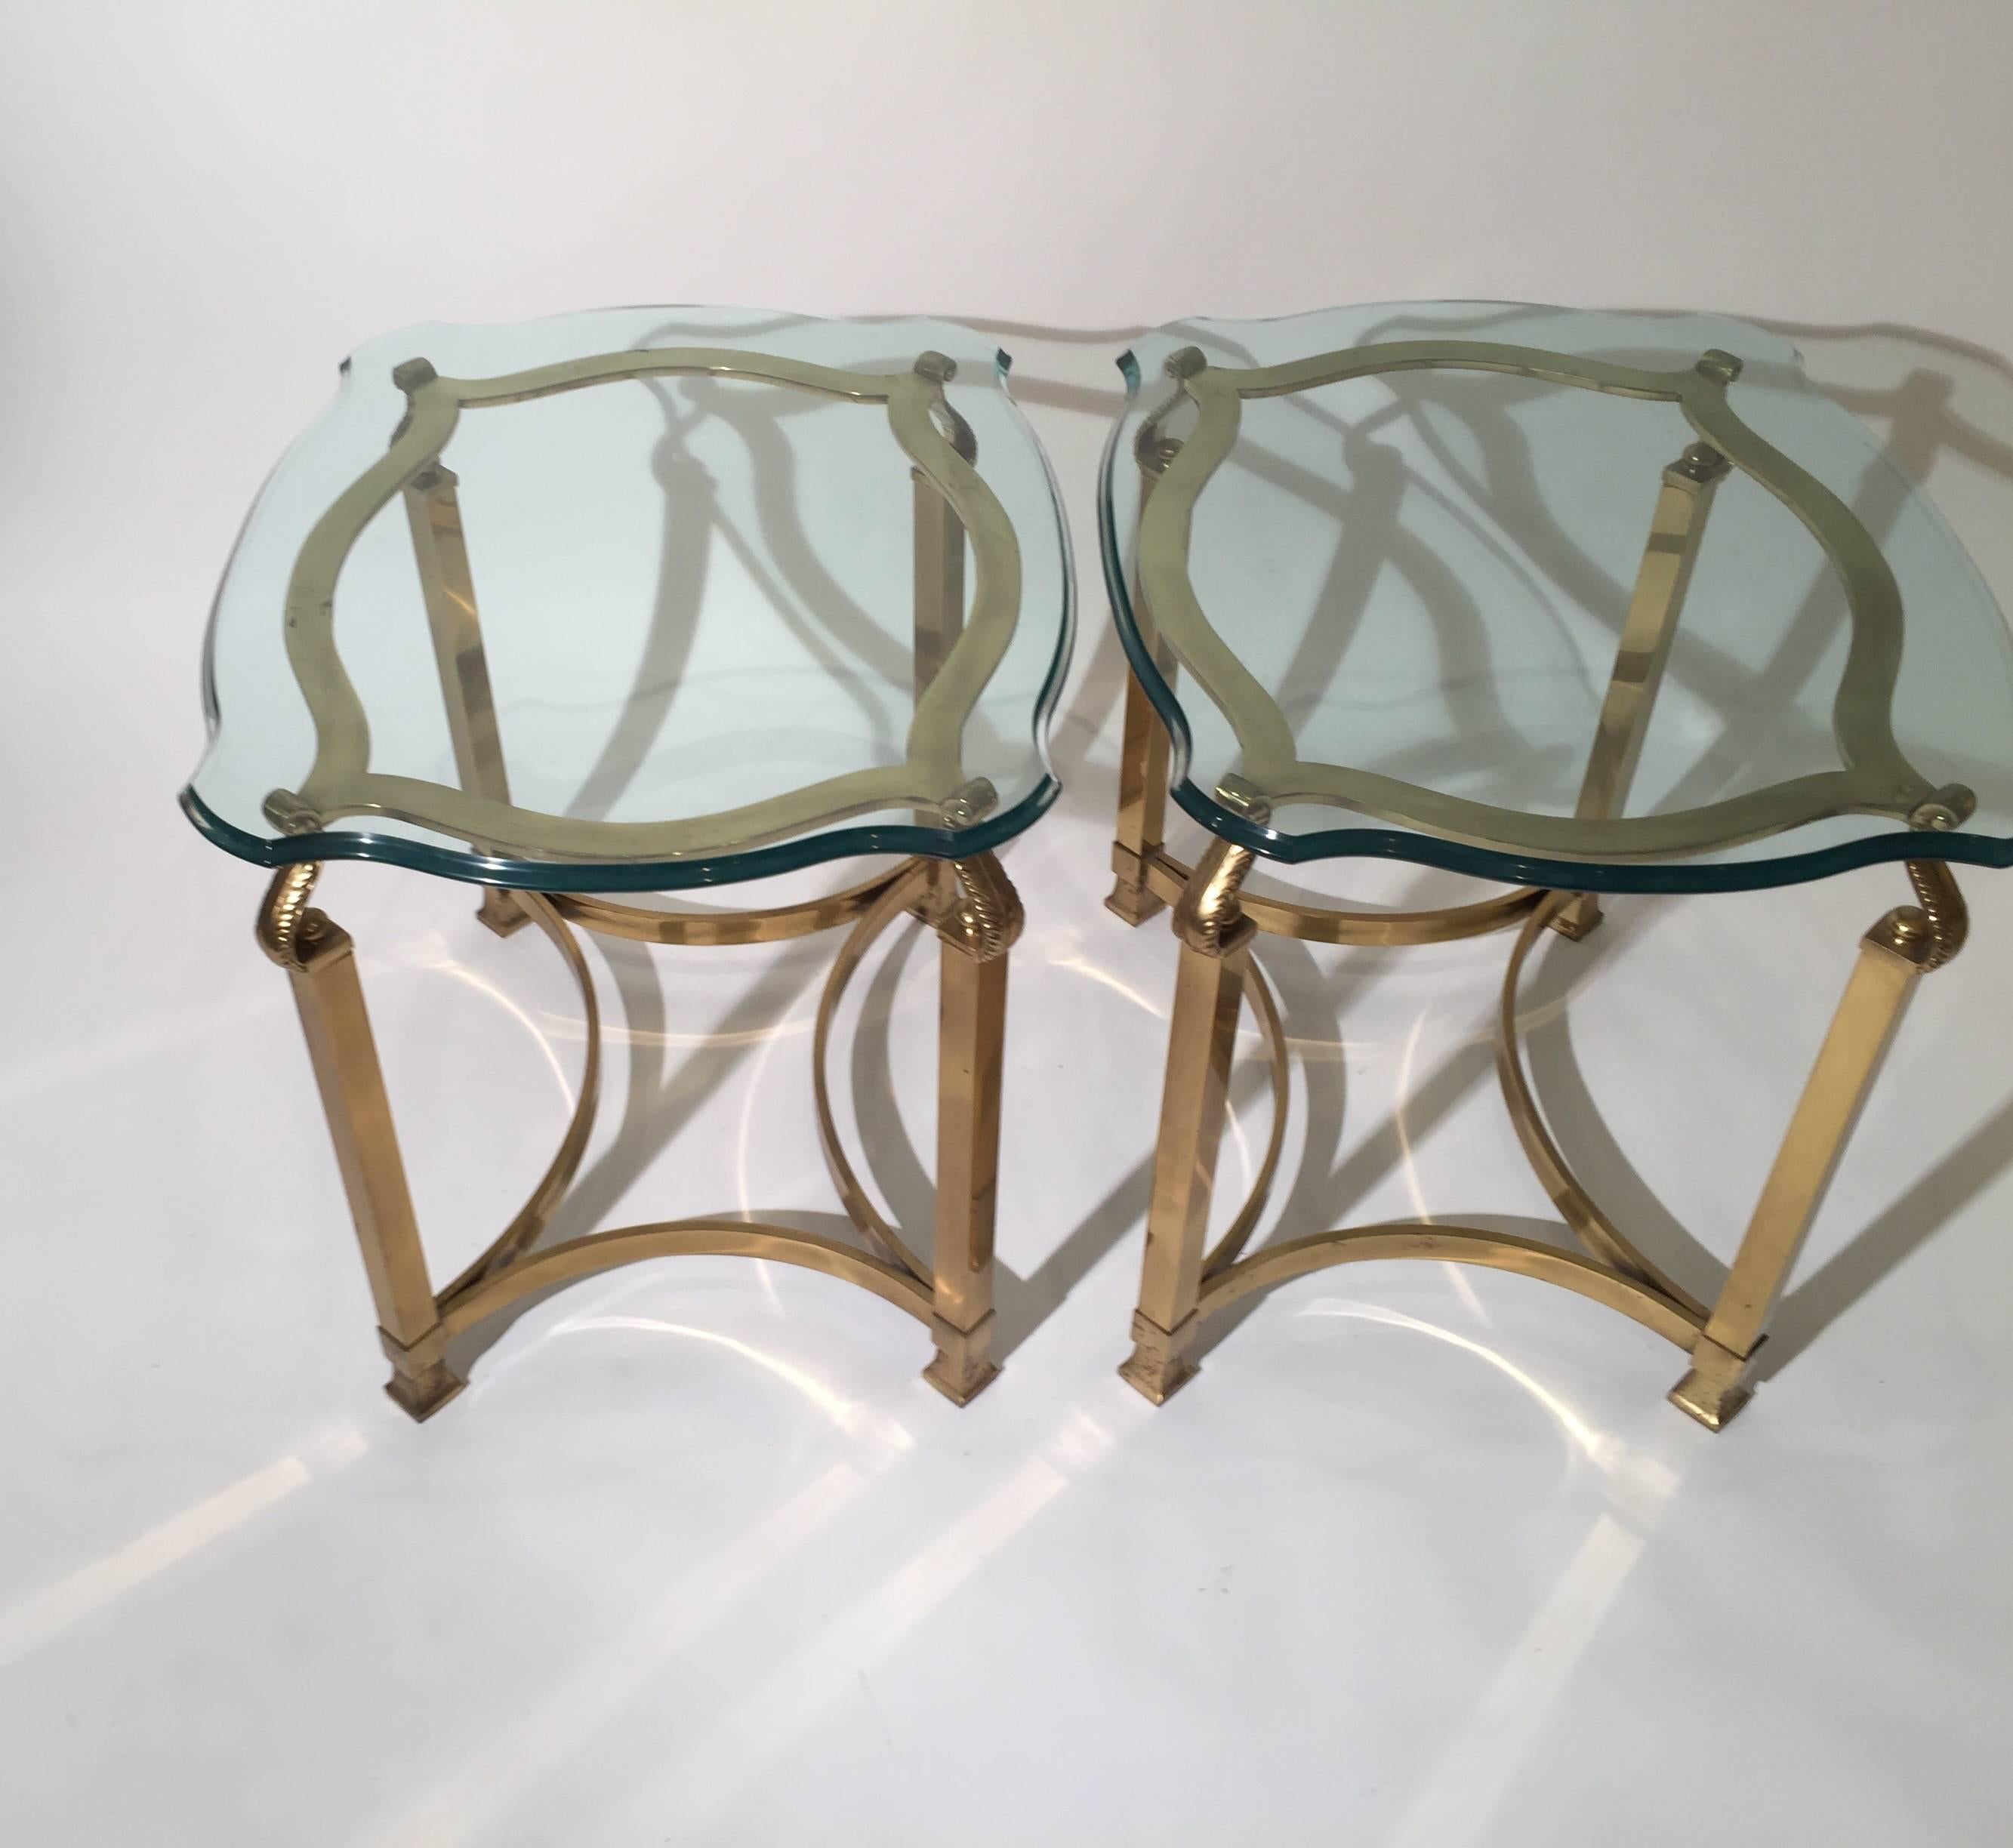 Pair of Mid-Century Modern Italian brass and glass side tables, with bevelled glass tops
Great for family room, bedroom or office marked Italy. Dimensions: 22